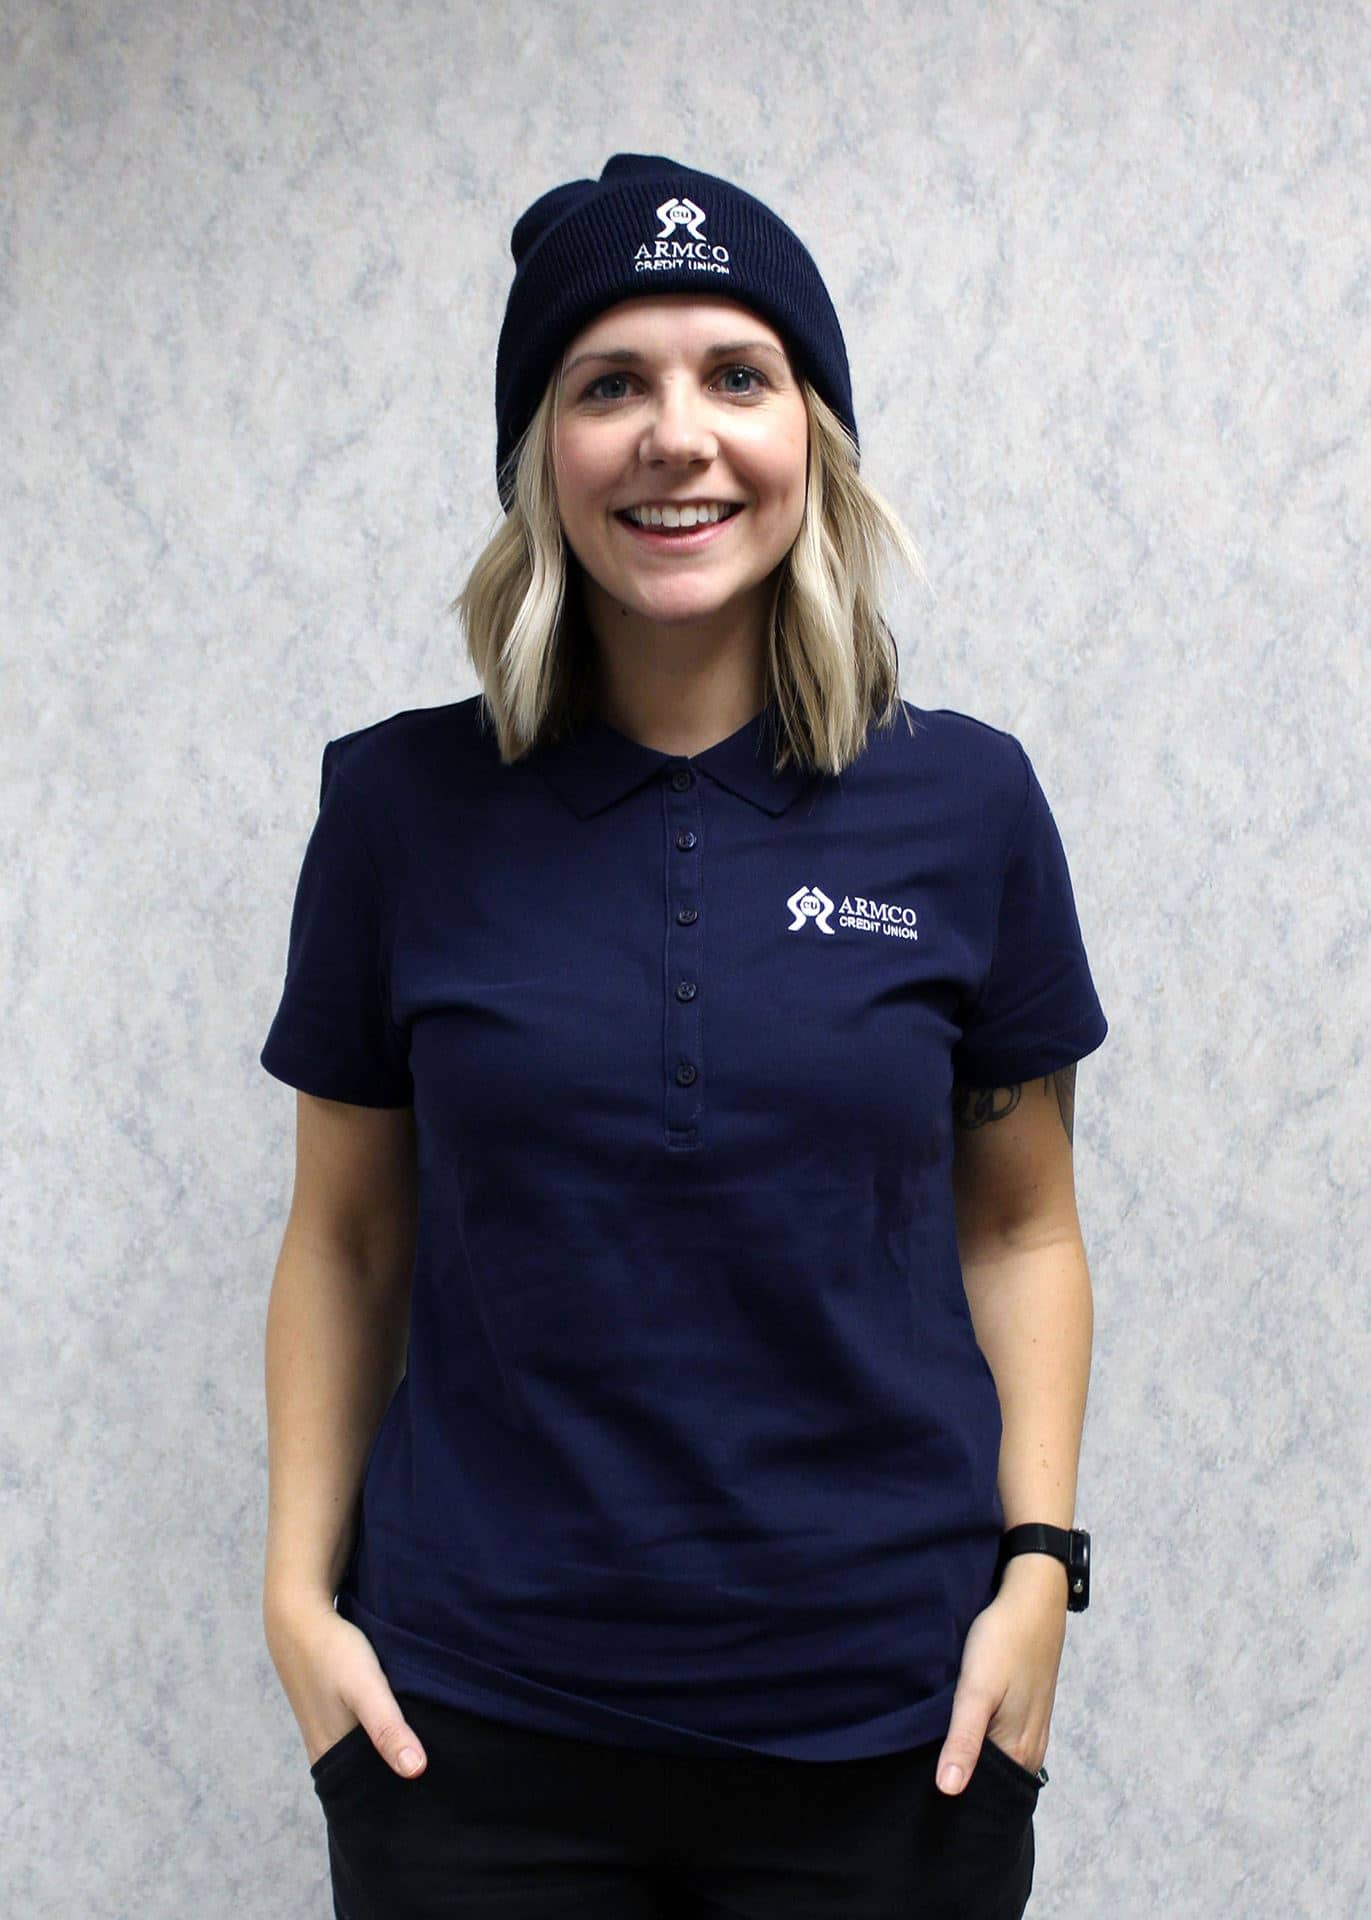 A girl wearing the navy Armco CU polo and beanie hat.